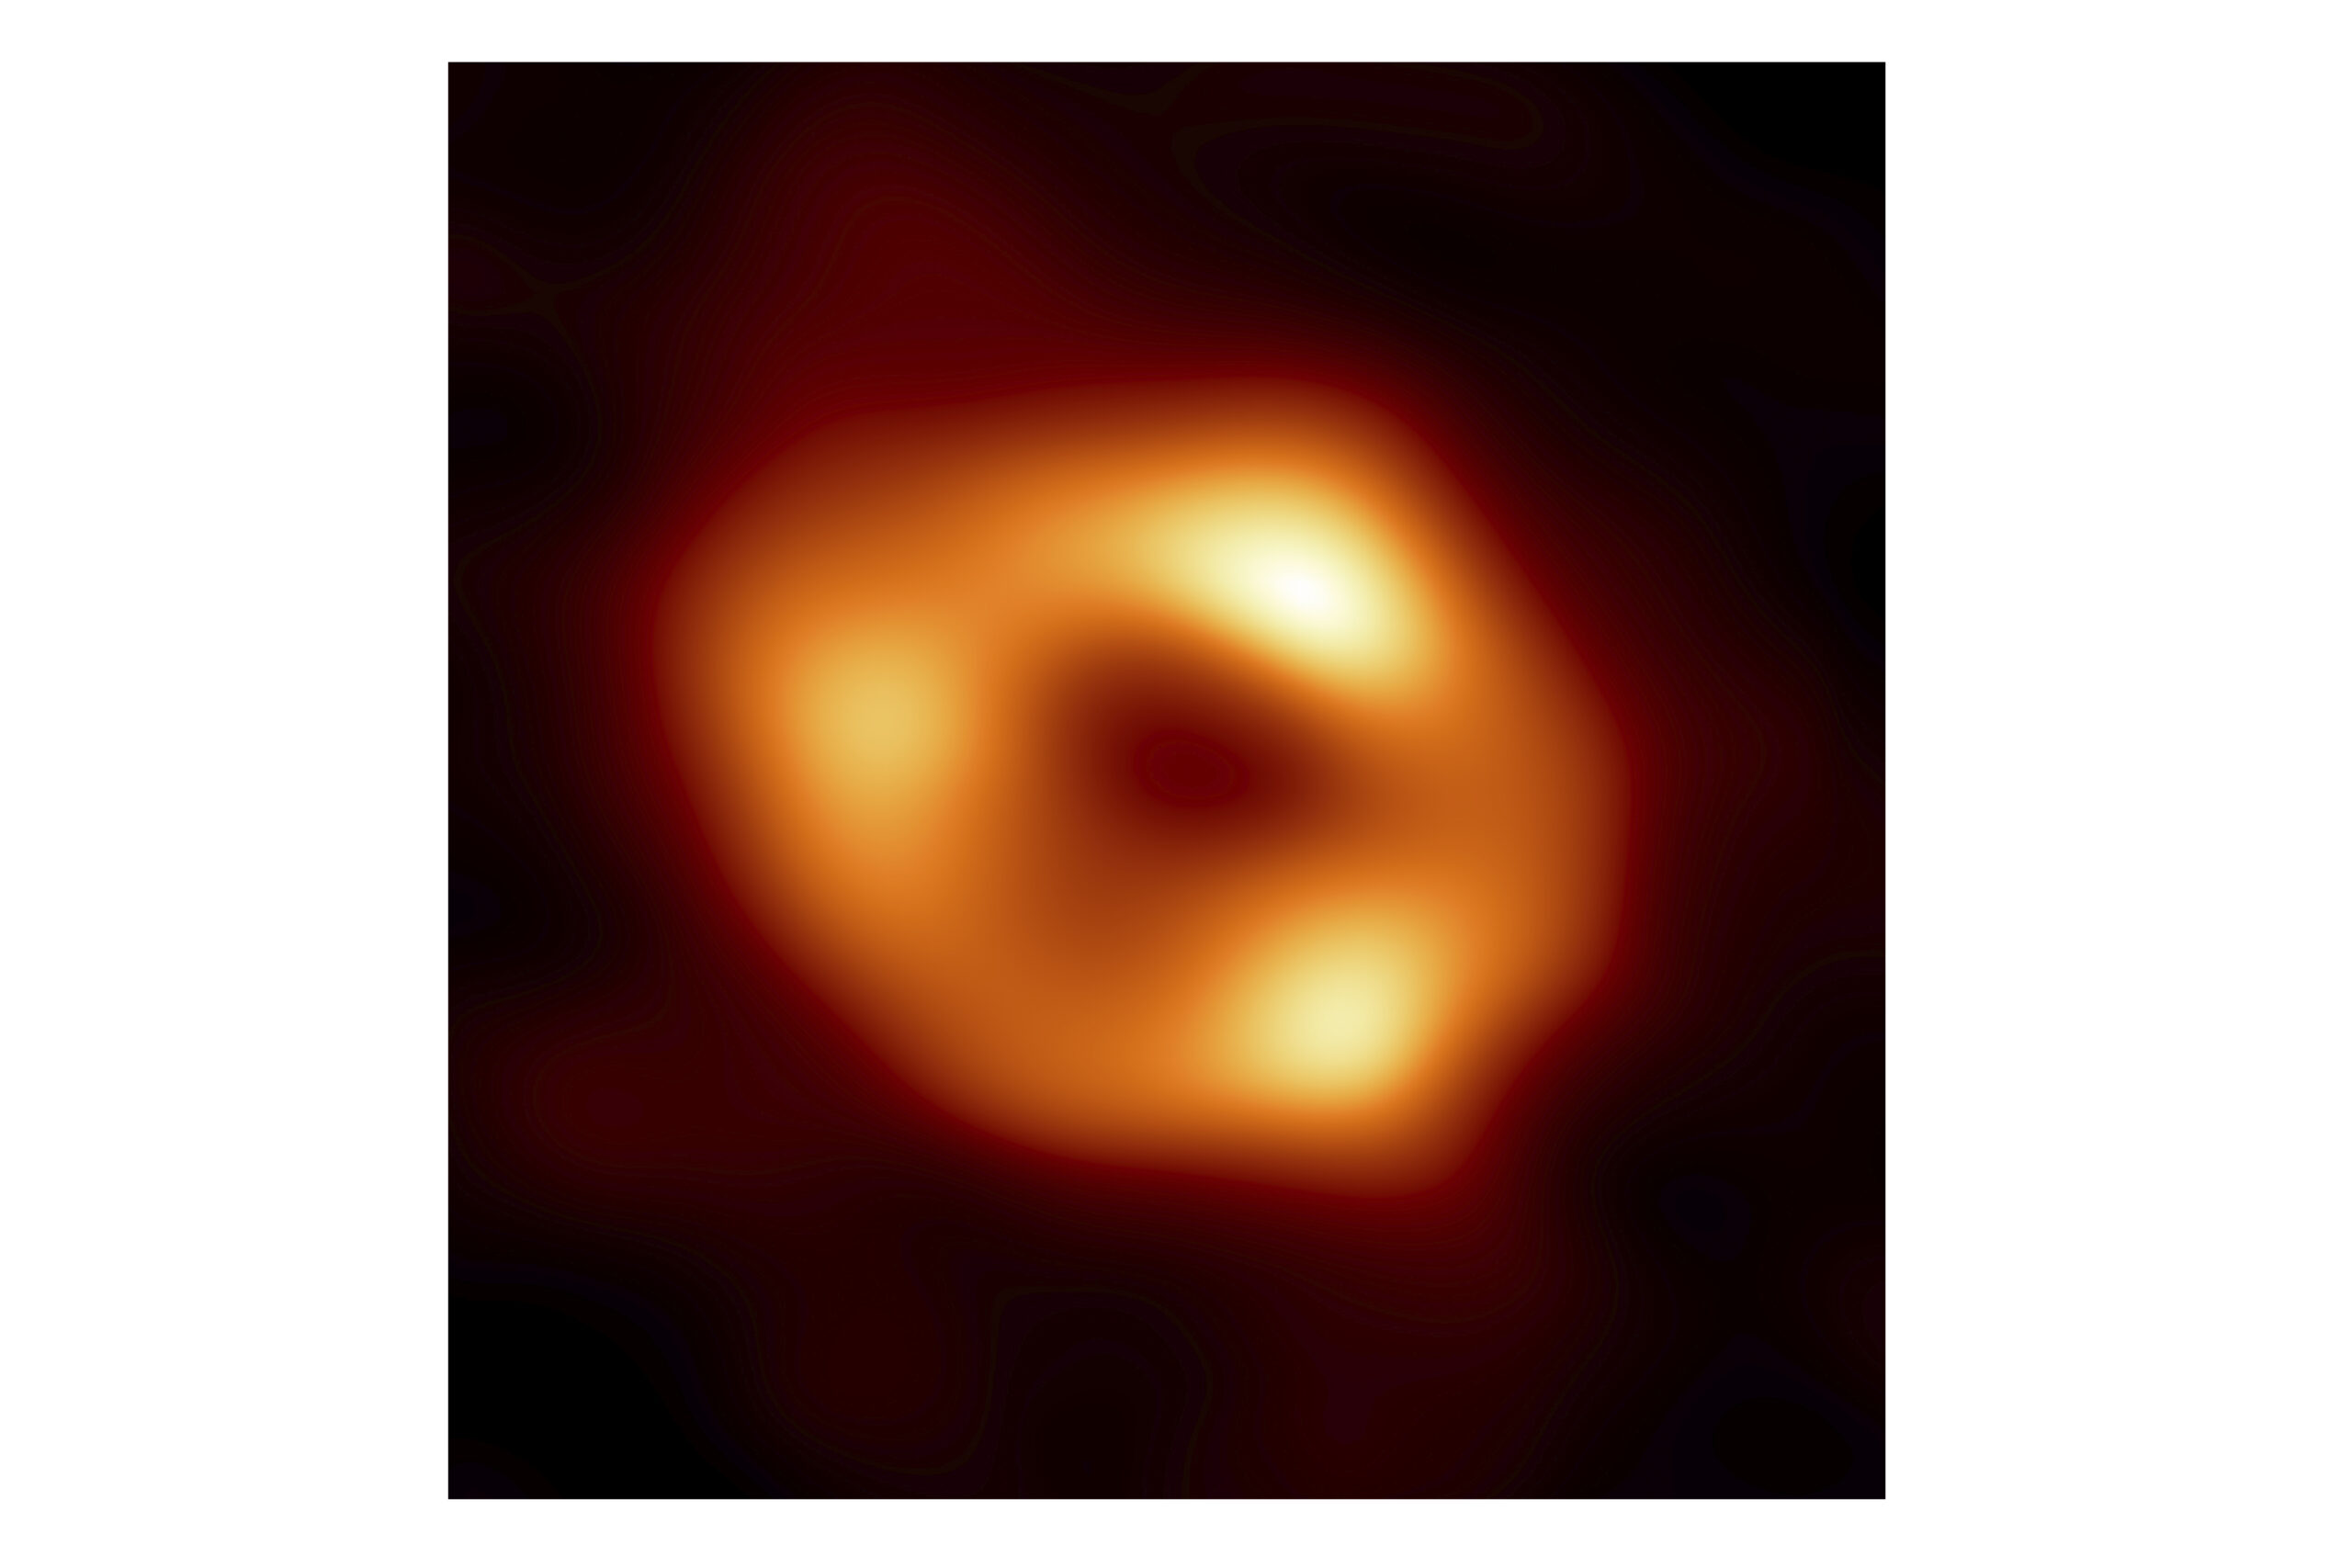 This image released by the Event Horizon Telescope Collaboration, Thursday, May 12, 2022, shows a black hole at the center of our Milky Way galaxy. The Milky Way black hole is called Sagittarius A*, near the border of Sagittarius and Scorpius constellations. It is 4 million times more massive than our sun. The image was made by eight synchronized radio telescopes around the world. (Event Horizon Telescope Collaboration via AP)